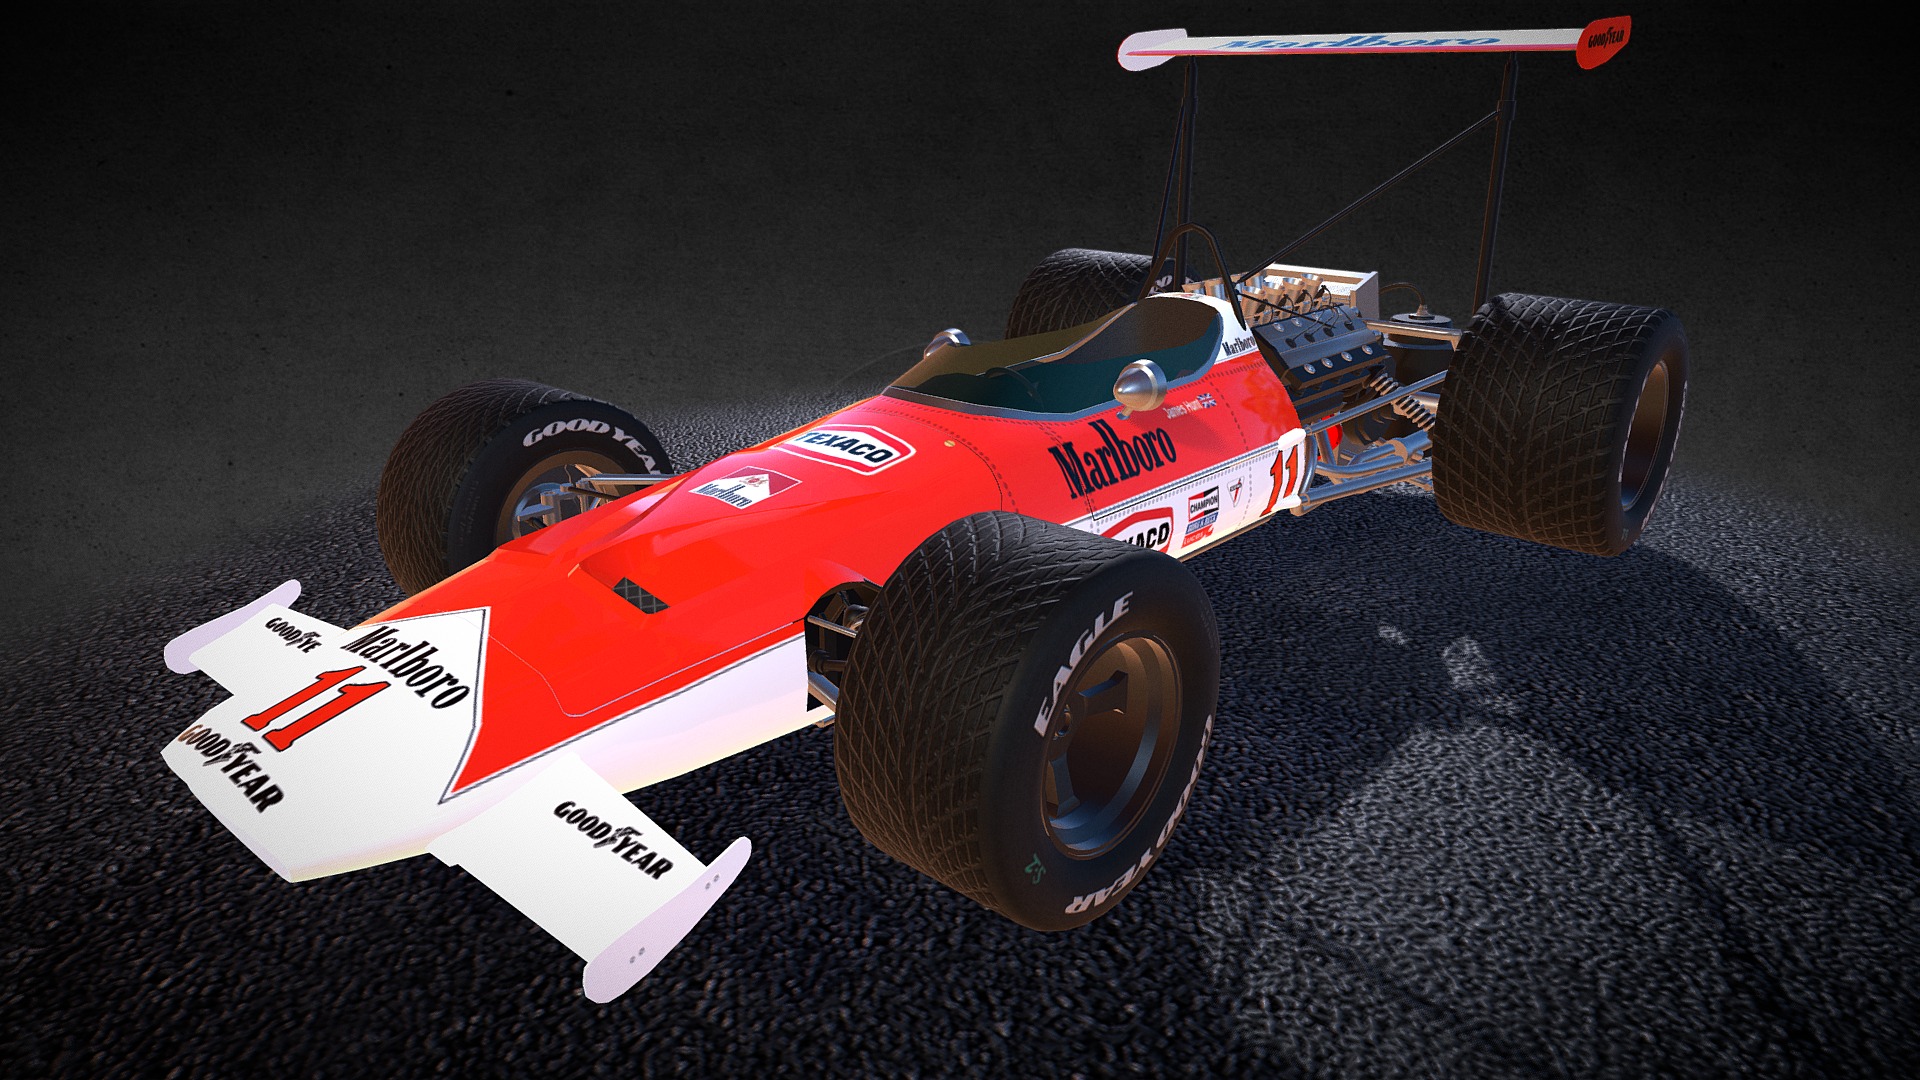 3D model Mclaren M7b - This is a 3D model of the Mclaren M7b. The 3D model is about a race car on a black surface.